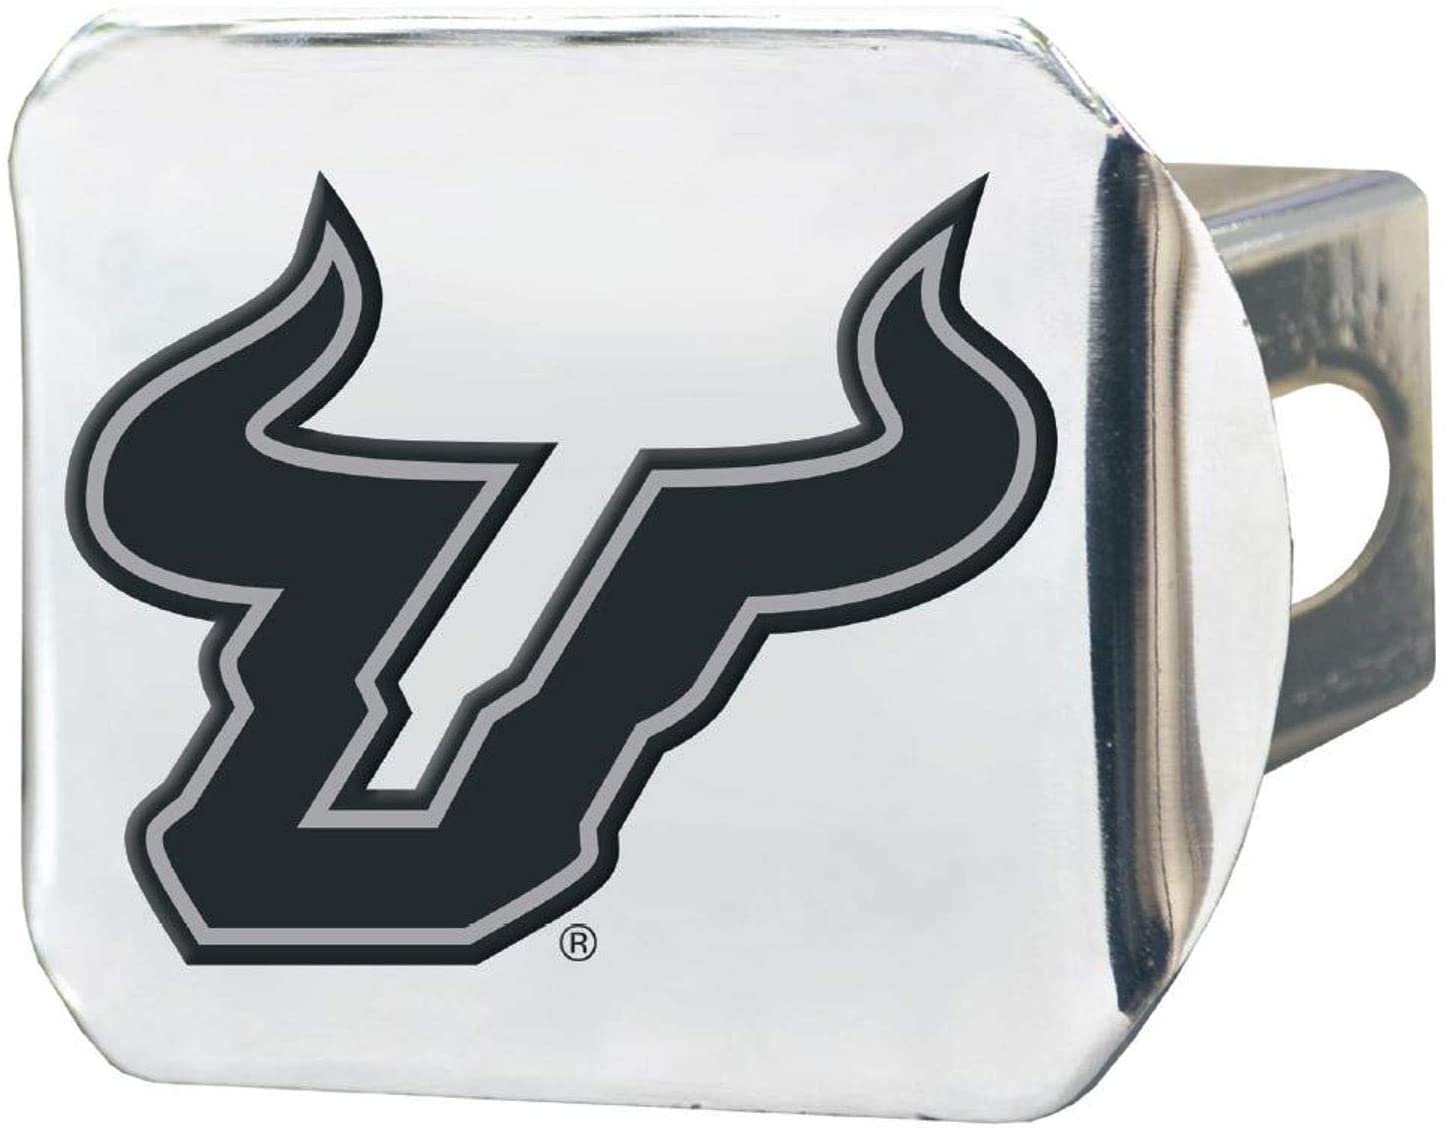 USF South Florida Bulls Hitch Cover Solid Metal with Raised Chrome Metal Emblem 2" Square Type III University of